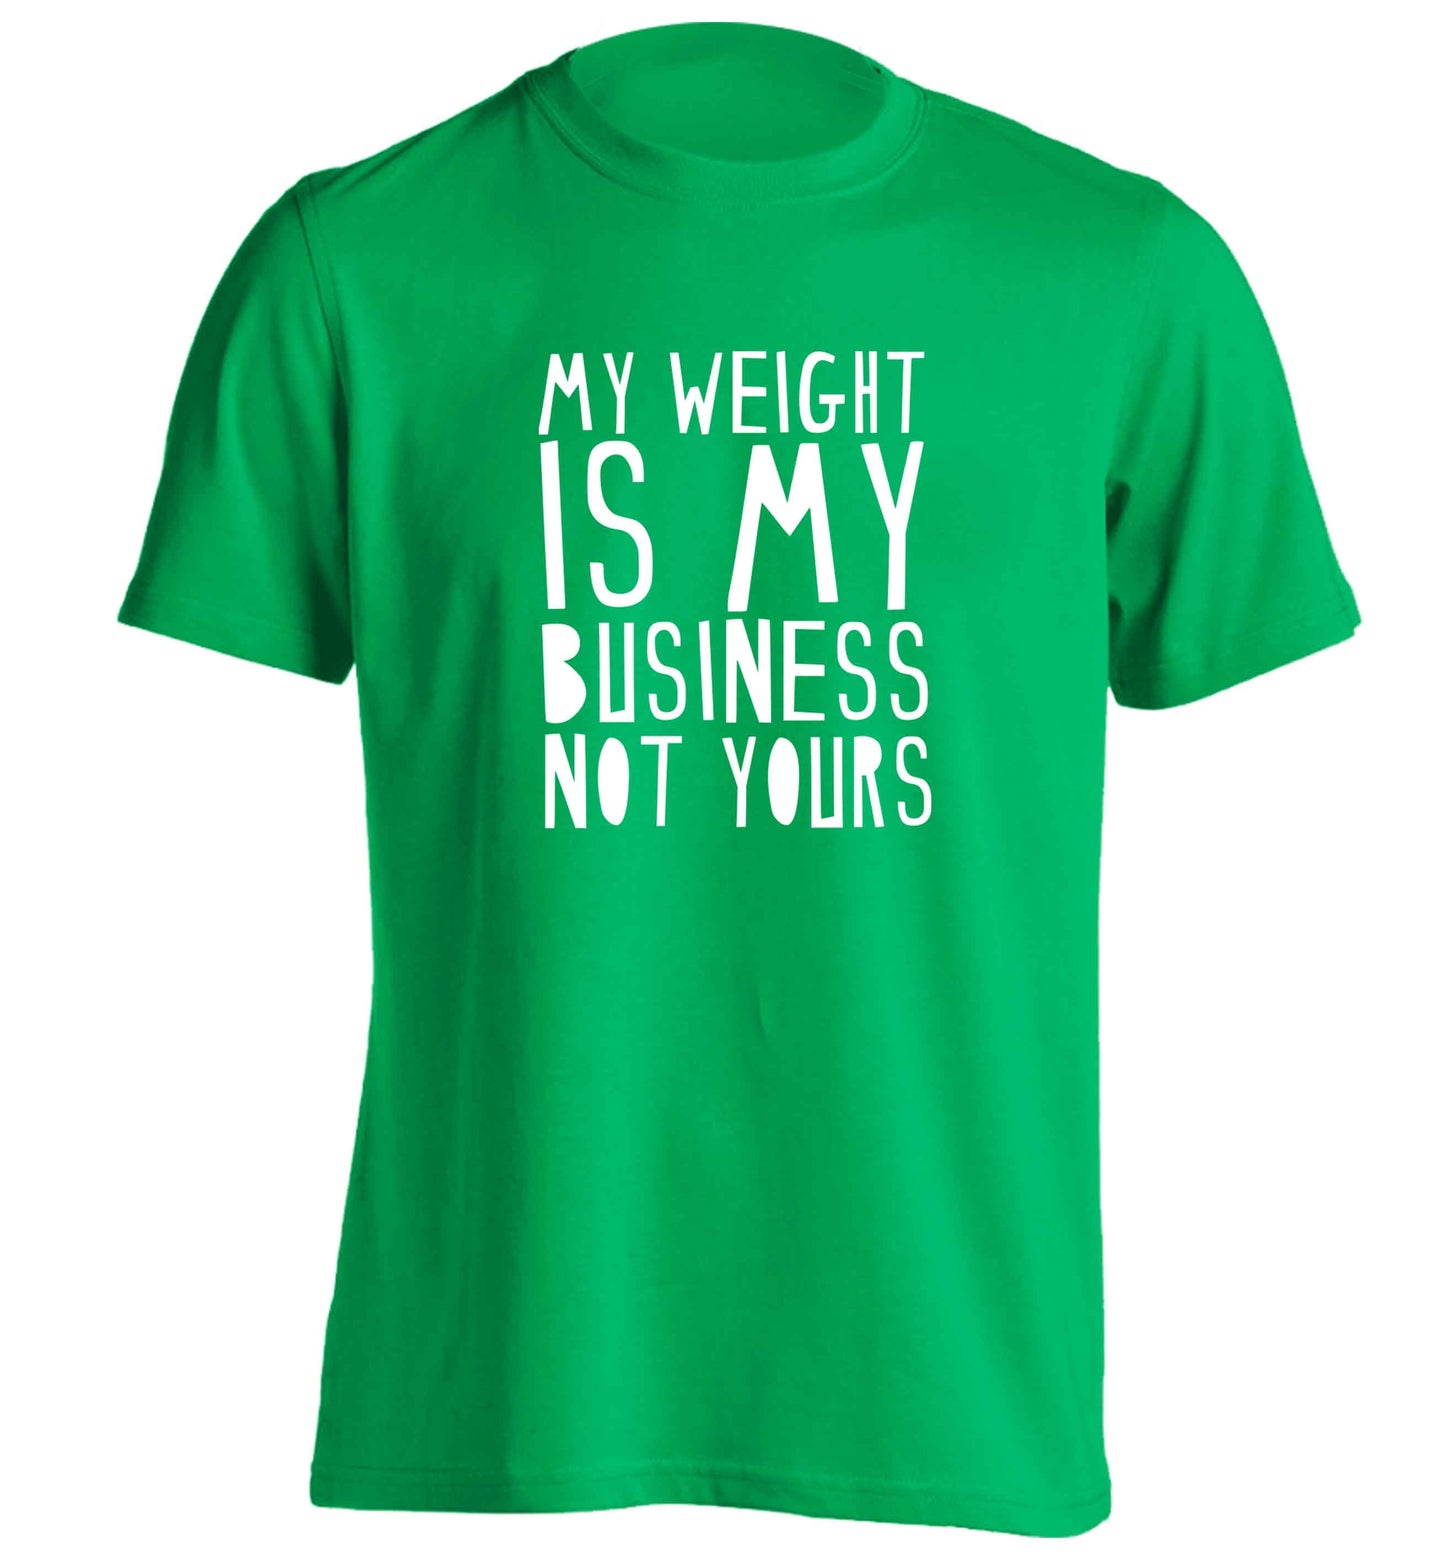 My weight is my business not yours adults unisex green Tshirt 2XL